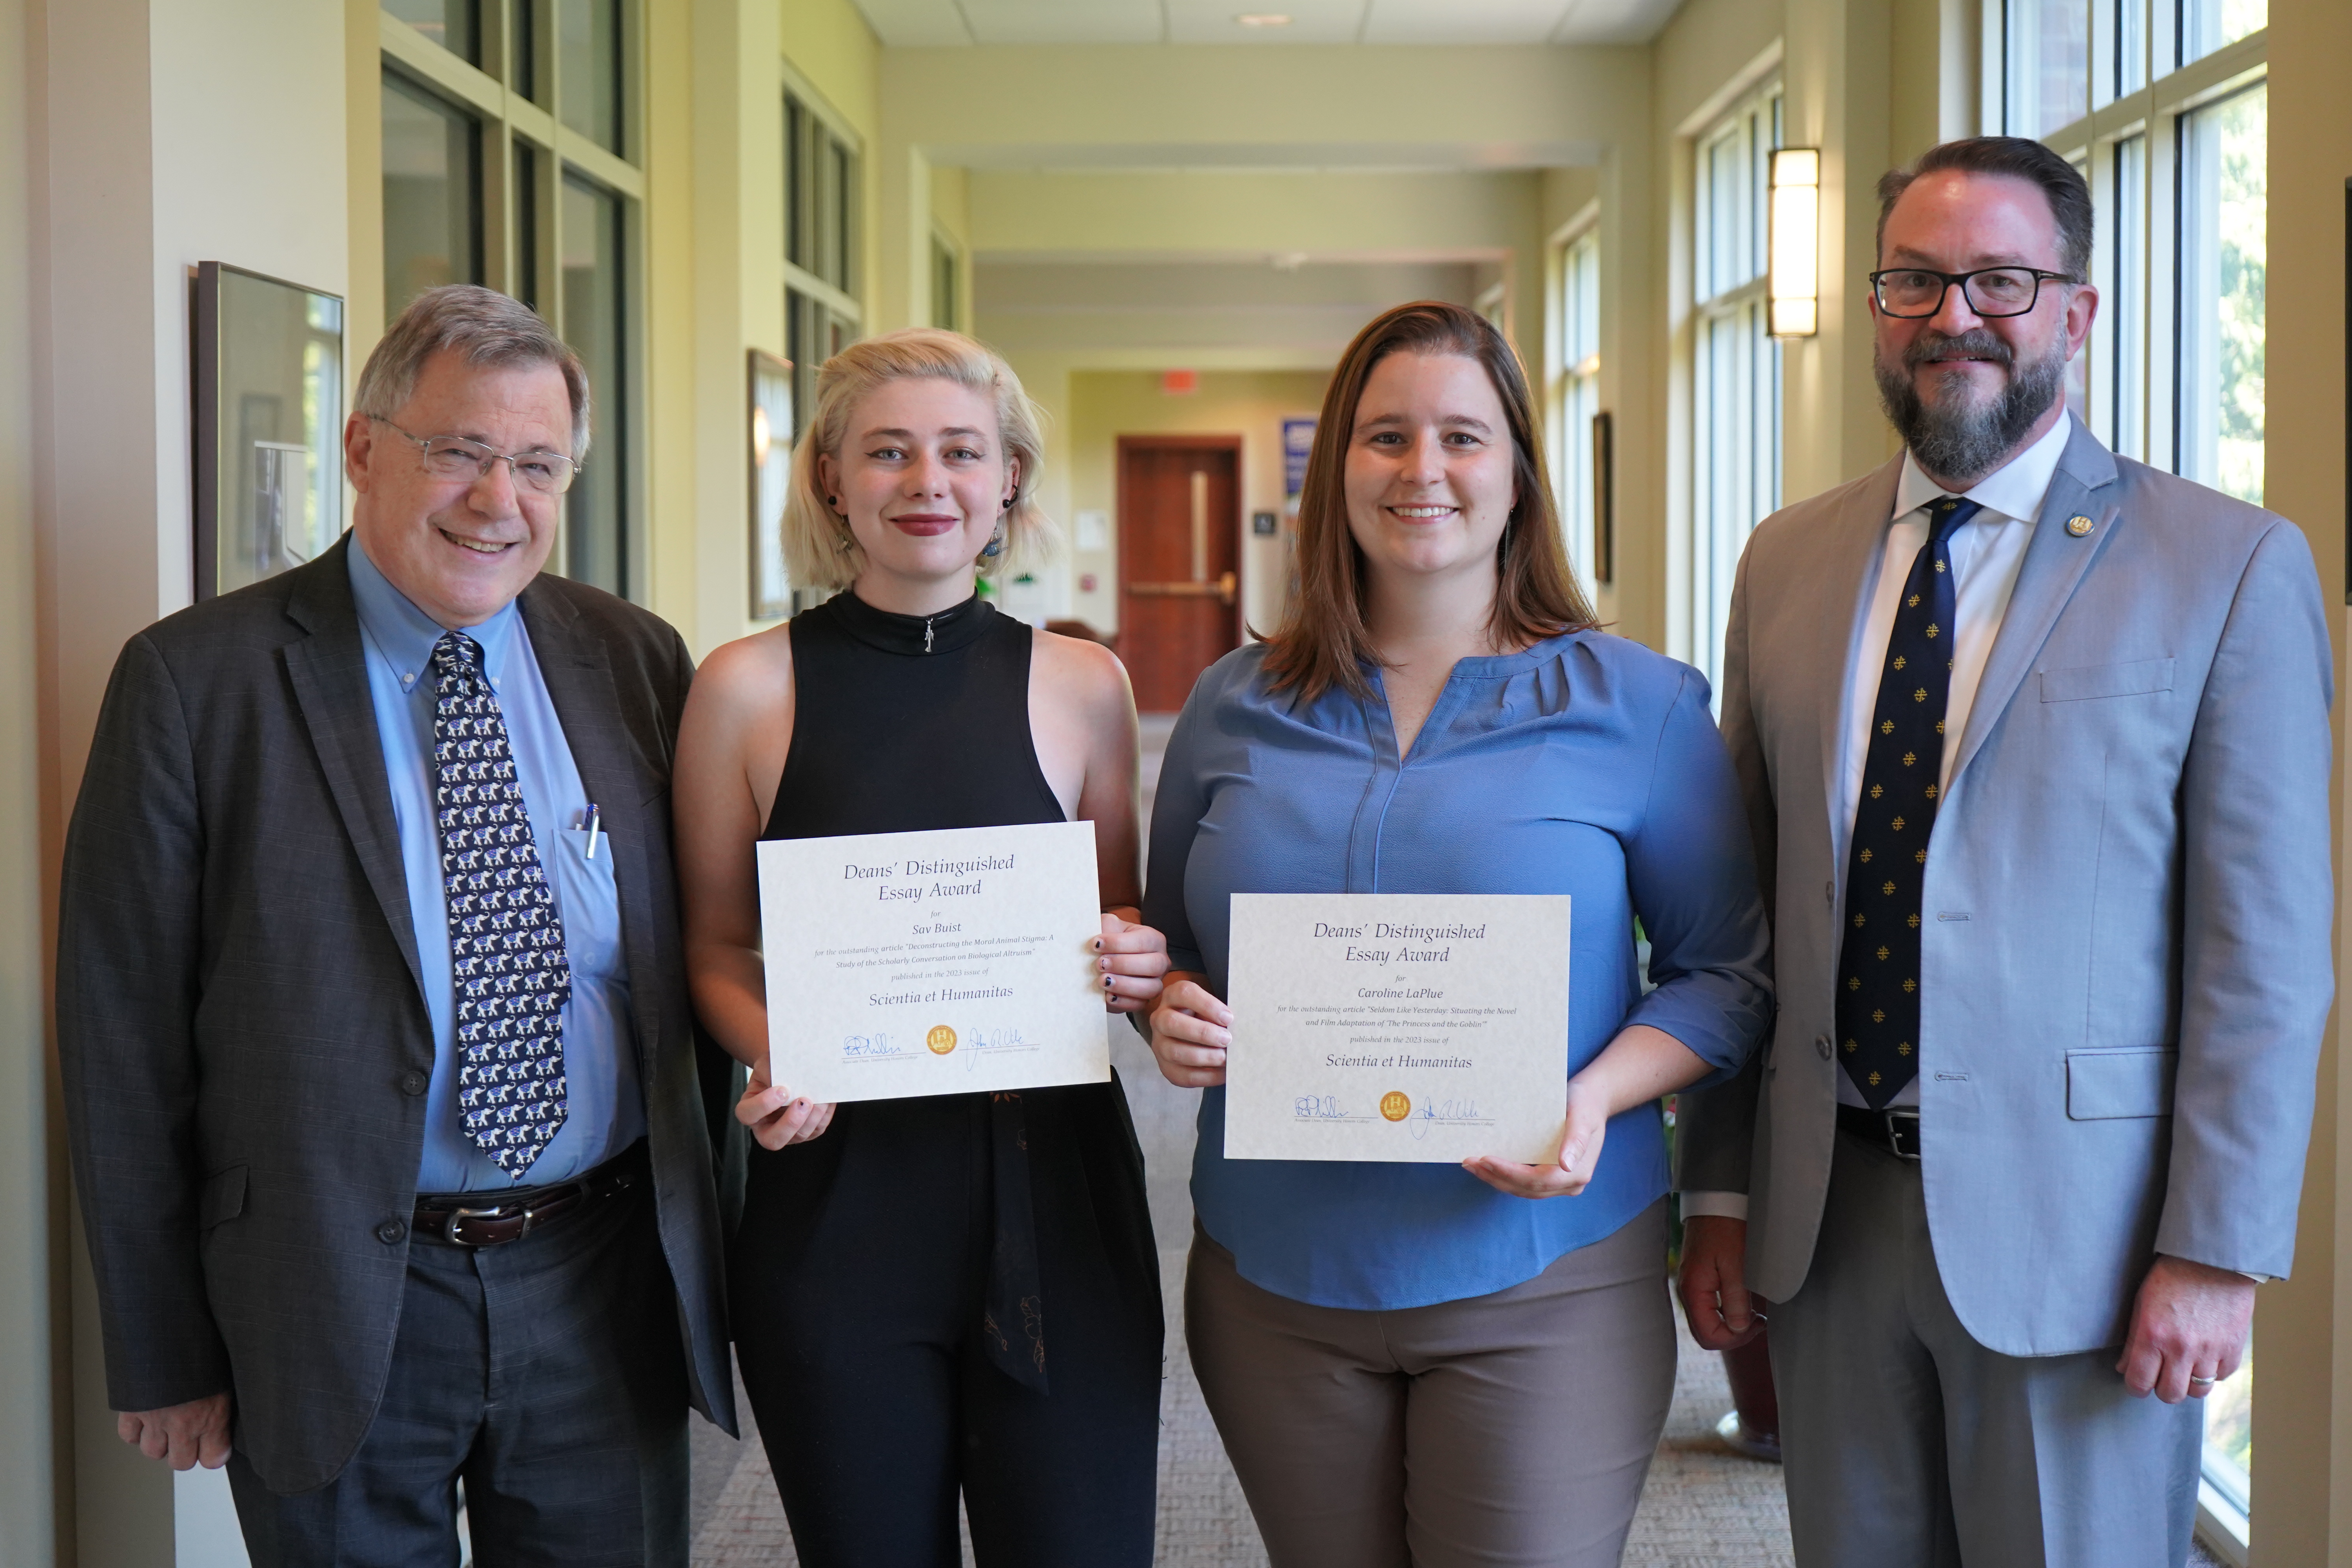 Photo of, from left to right, Dean Vile, Sav Buist, Caroline LaPlue, and Dean Phillips. Buist and LaPlue are holding ceritificates recognizing their Deans Distinguished Essay.